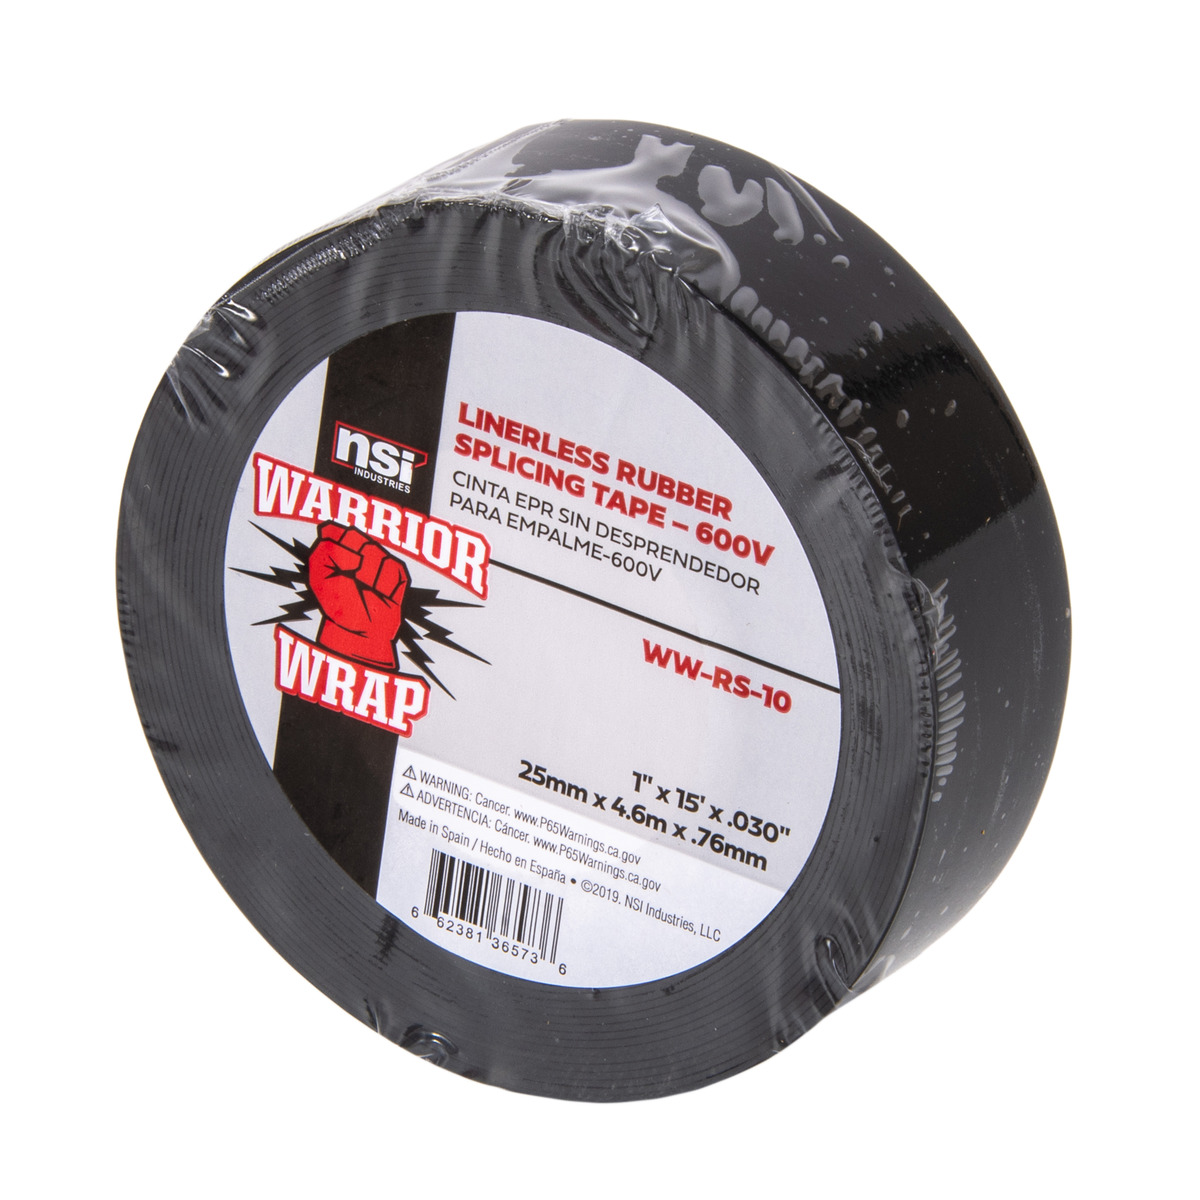 Black Linerless Rubber Splicing Tape, 1in Wide, 15ft Long - NSI Industries